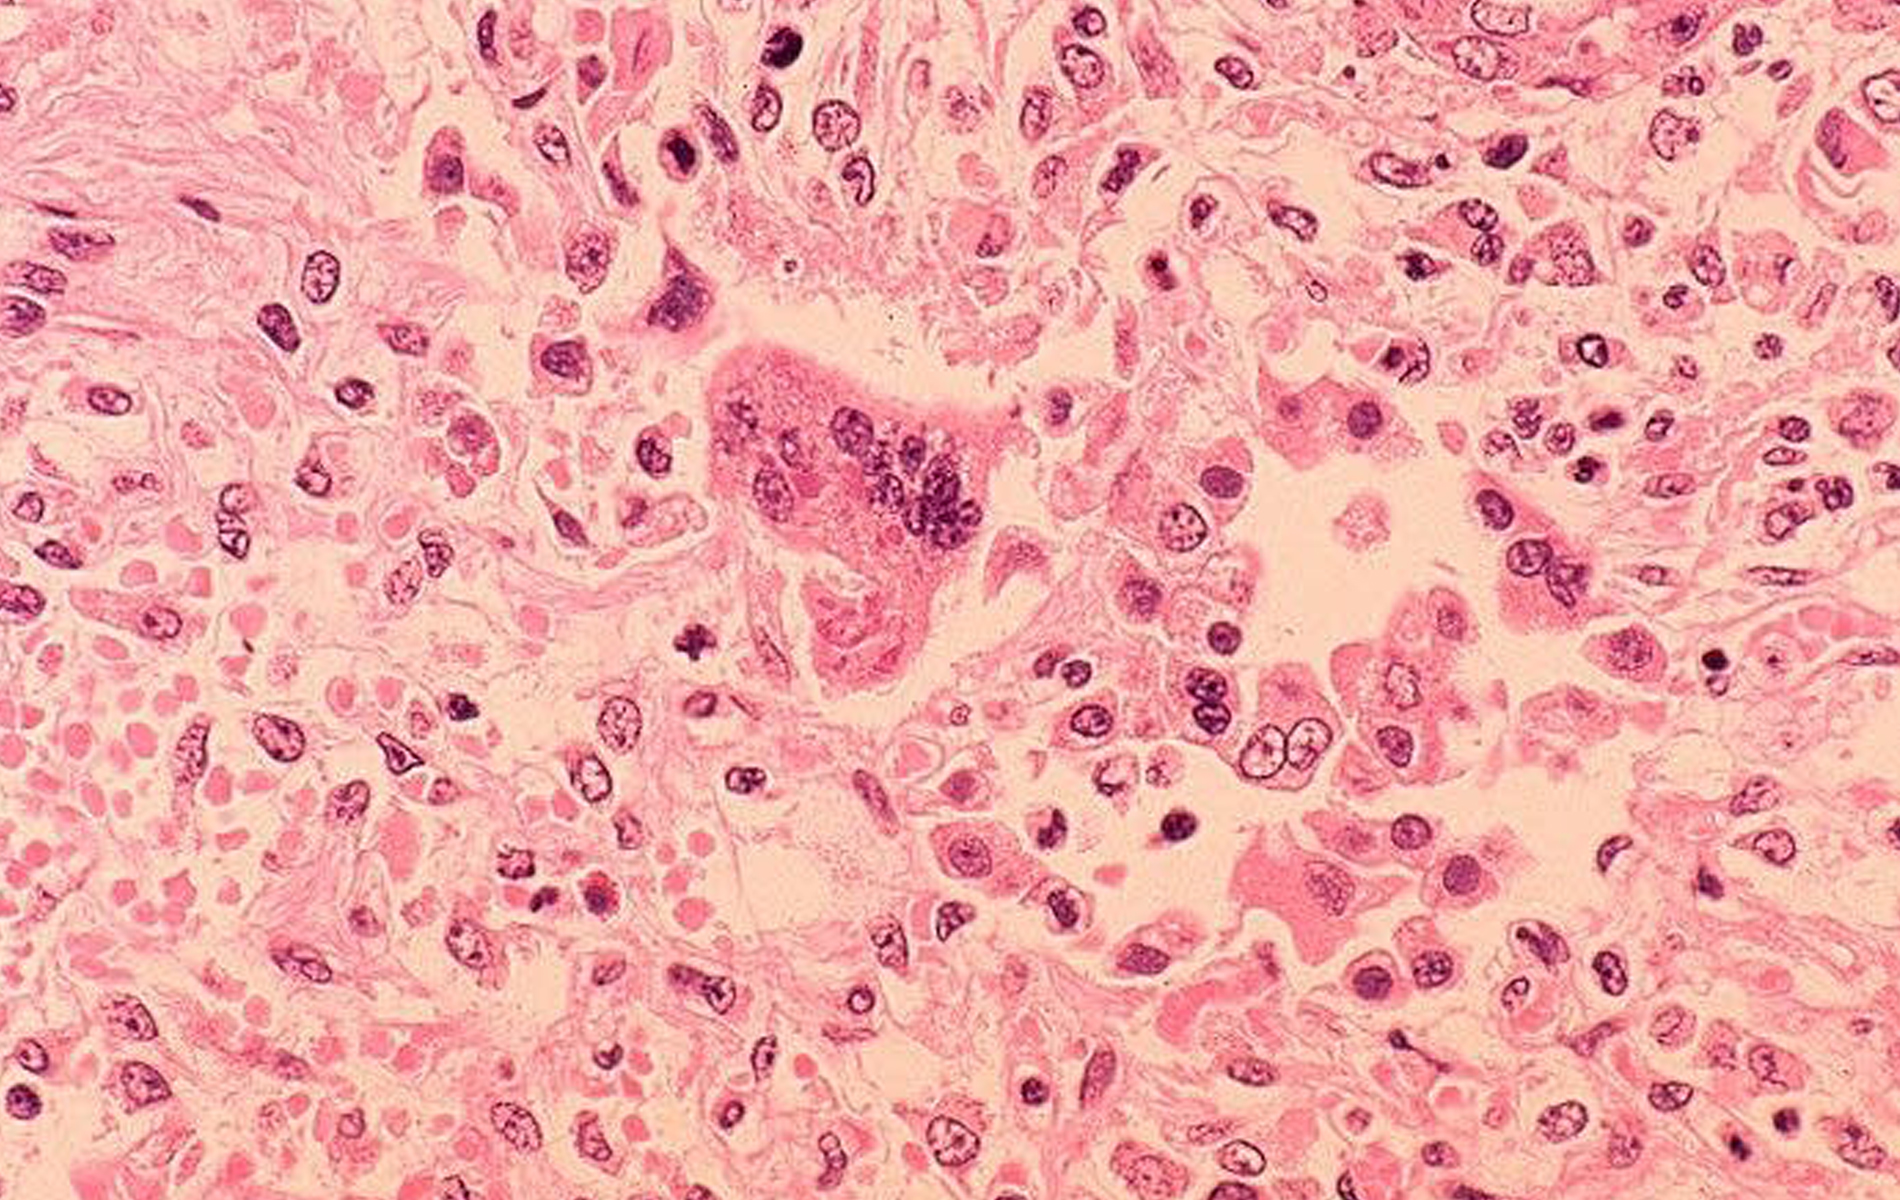 What You Need to Know About Measles